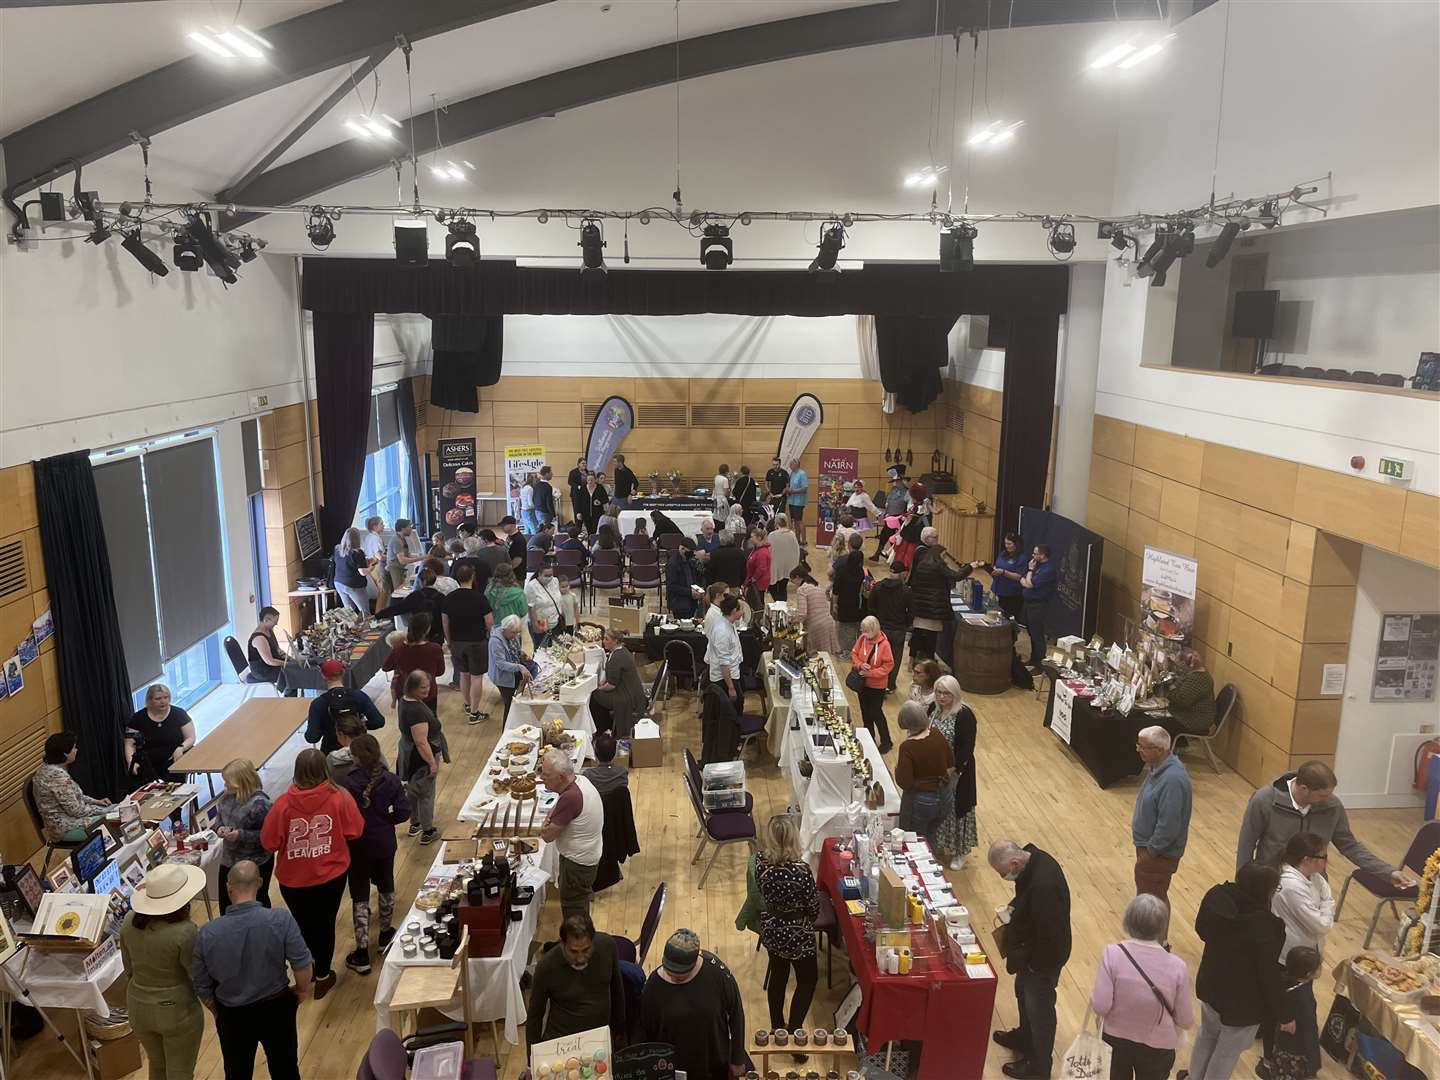 Taste of Nairn 2022 proved to be a real success.